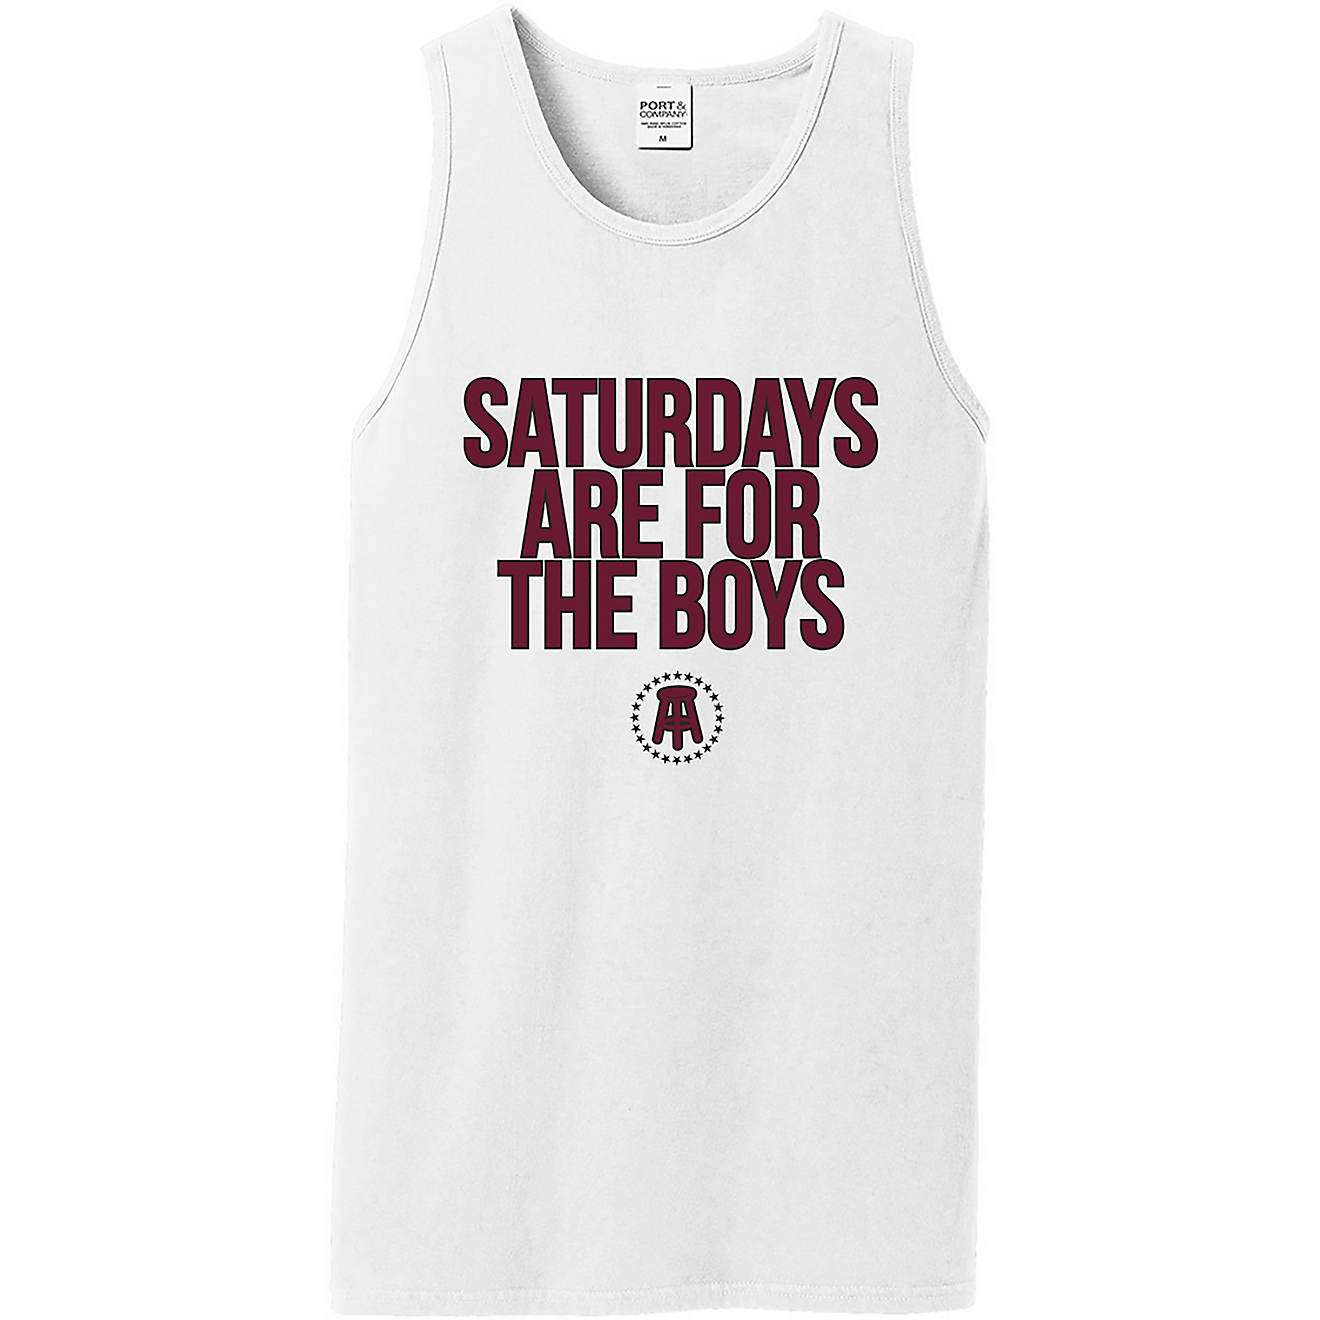 Barstool Sports Men's Saturdays Are For The Boys Tank Top                                                                        - view number 1